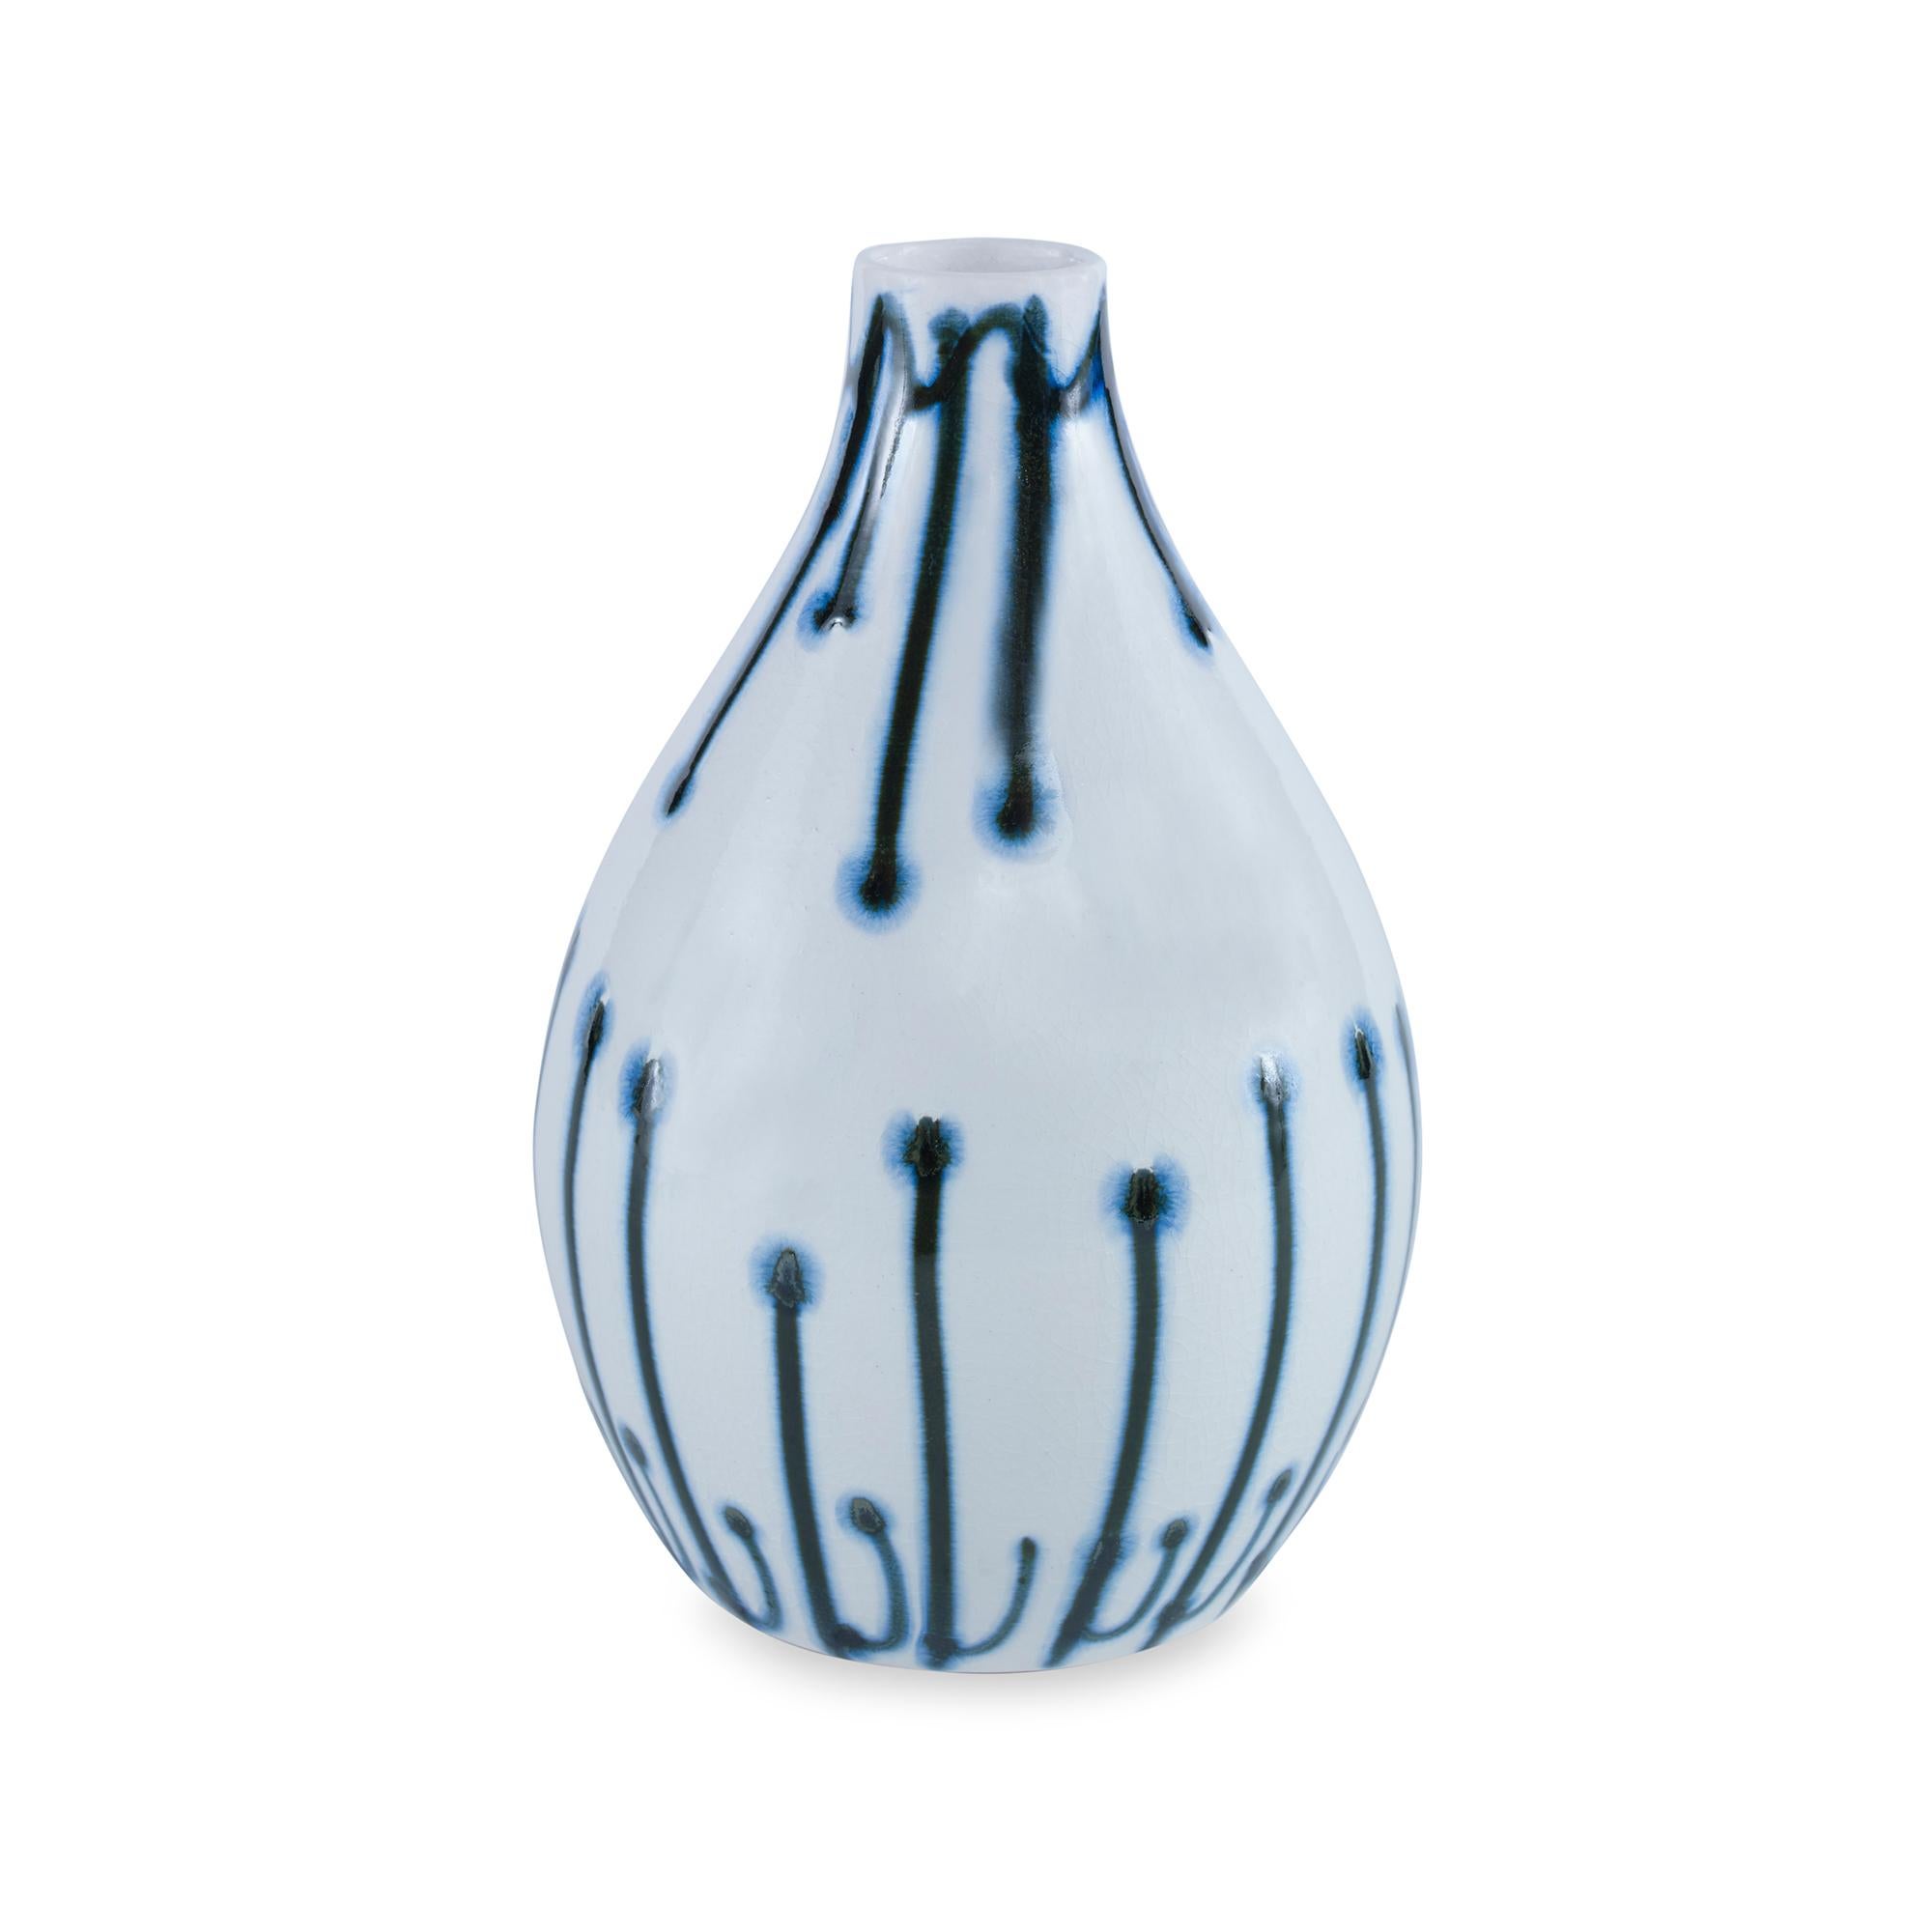 A hand painted, earthenware vase with a reactive blue glaze. Due to the handmade nature of this product, variation is to be expected from piece to piece.
 